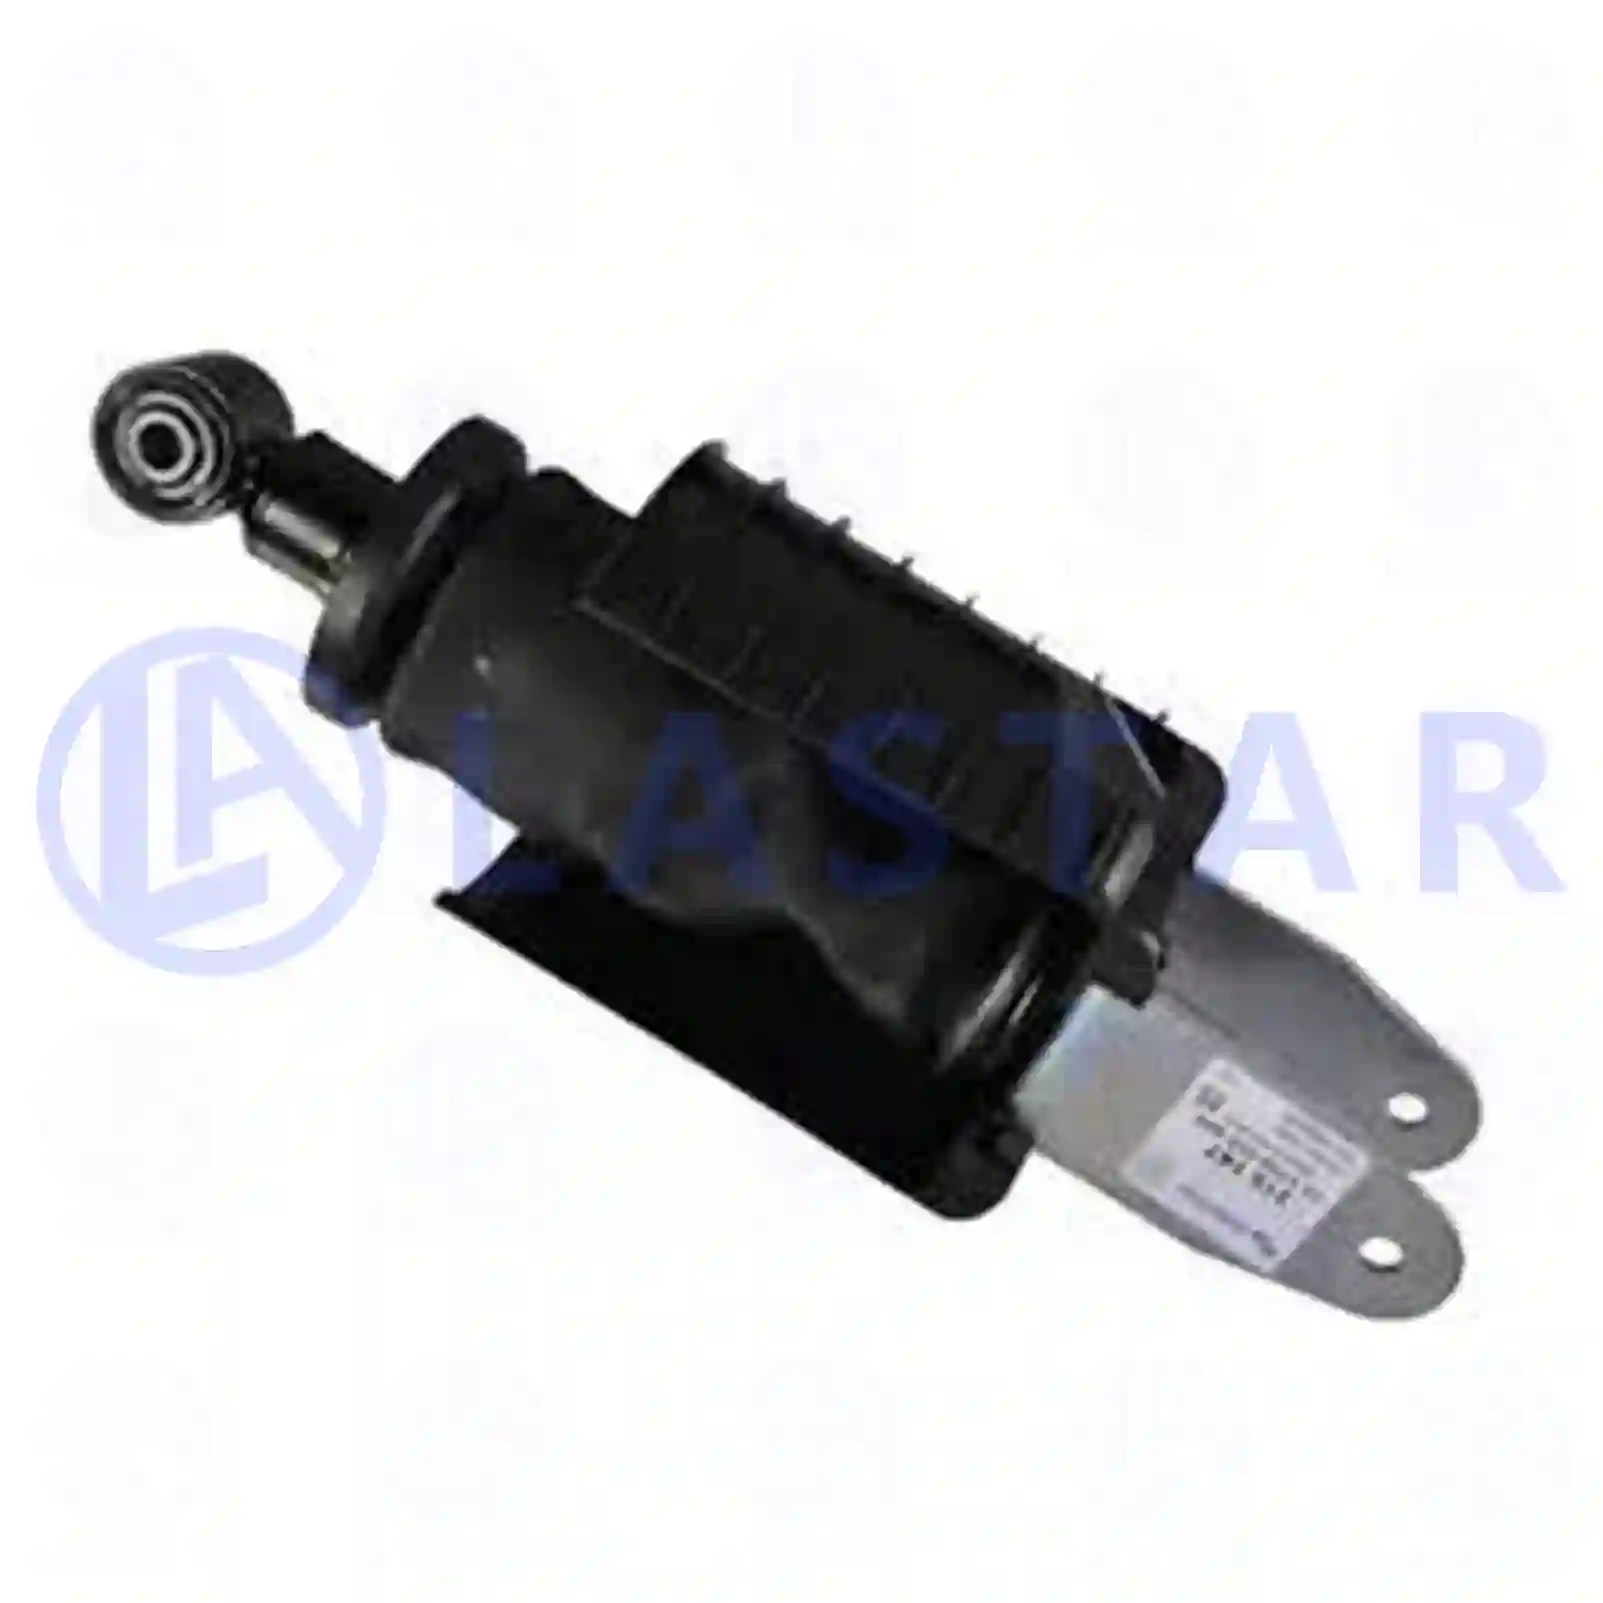 Cabin shock absorber, 77728055, 9603106155, 96031 ||  77728055 Lastar Spare Part | Truck Spare Parts, Auotomotive Spare Parts Cabin shock absorber, 77728055, 9603106155, 96031 ||  77728055 Lastar Spare Part | Truck Spare Parts, Auotomotive Spare Parts